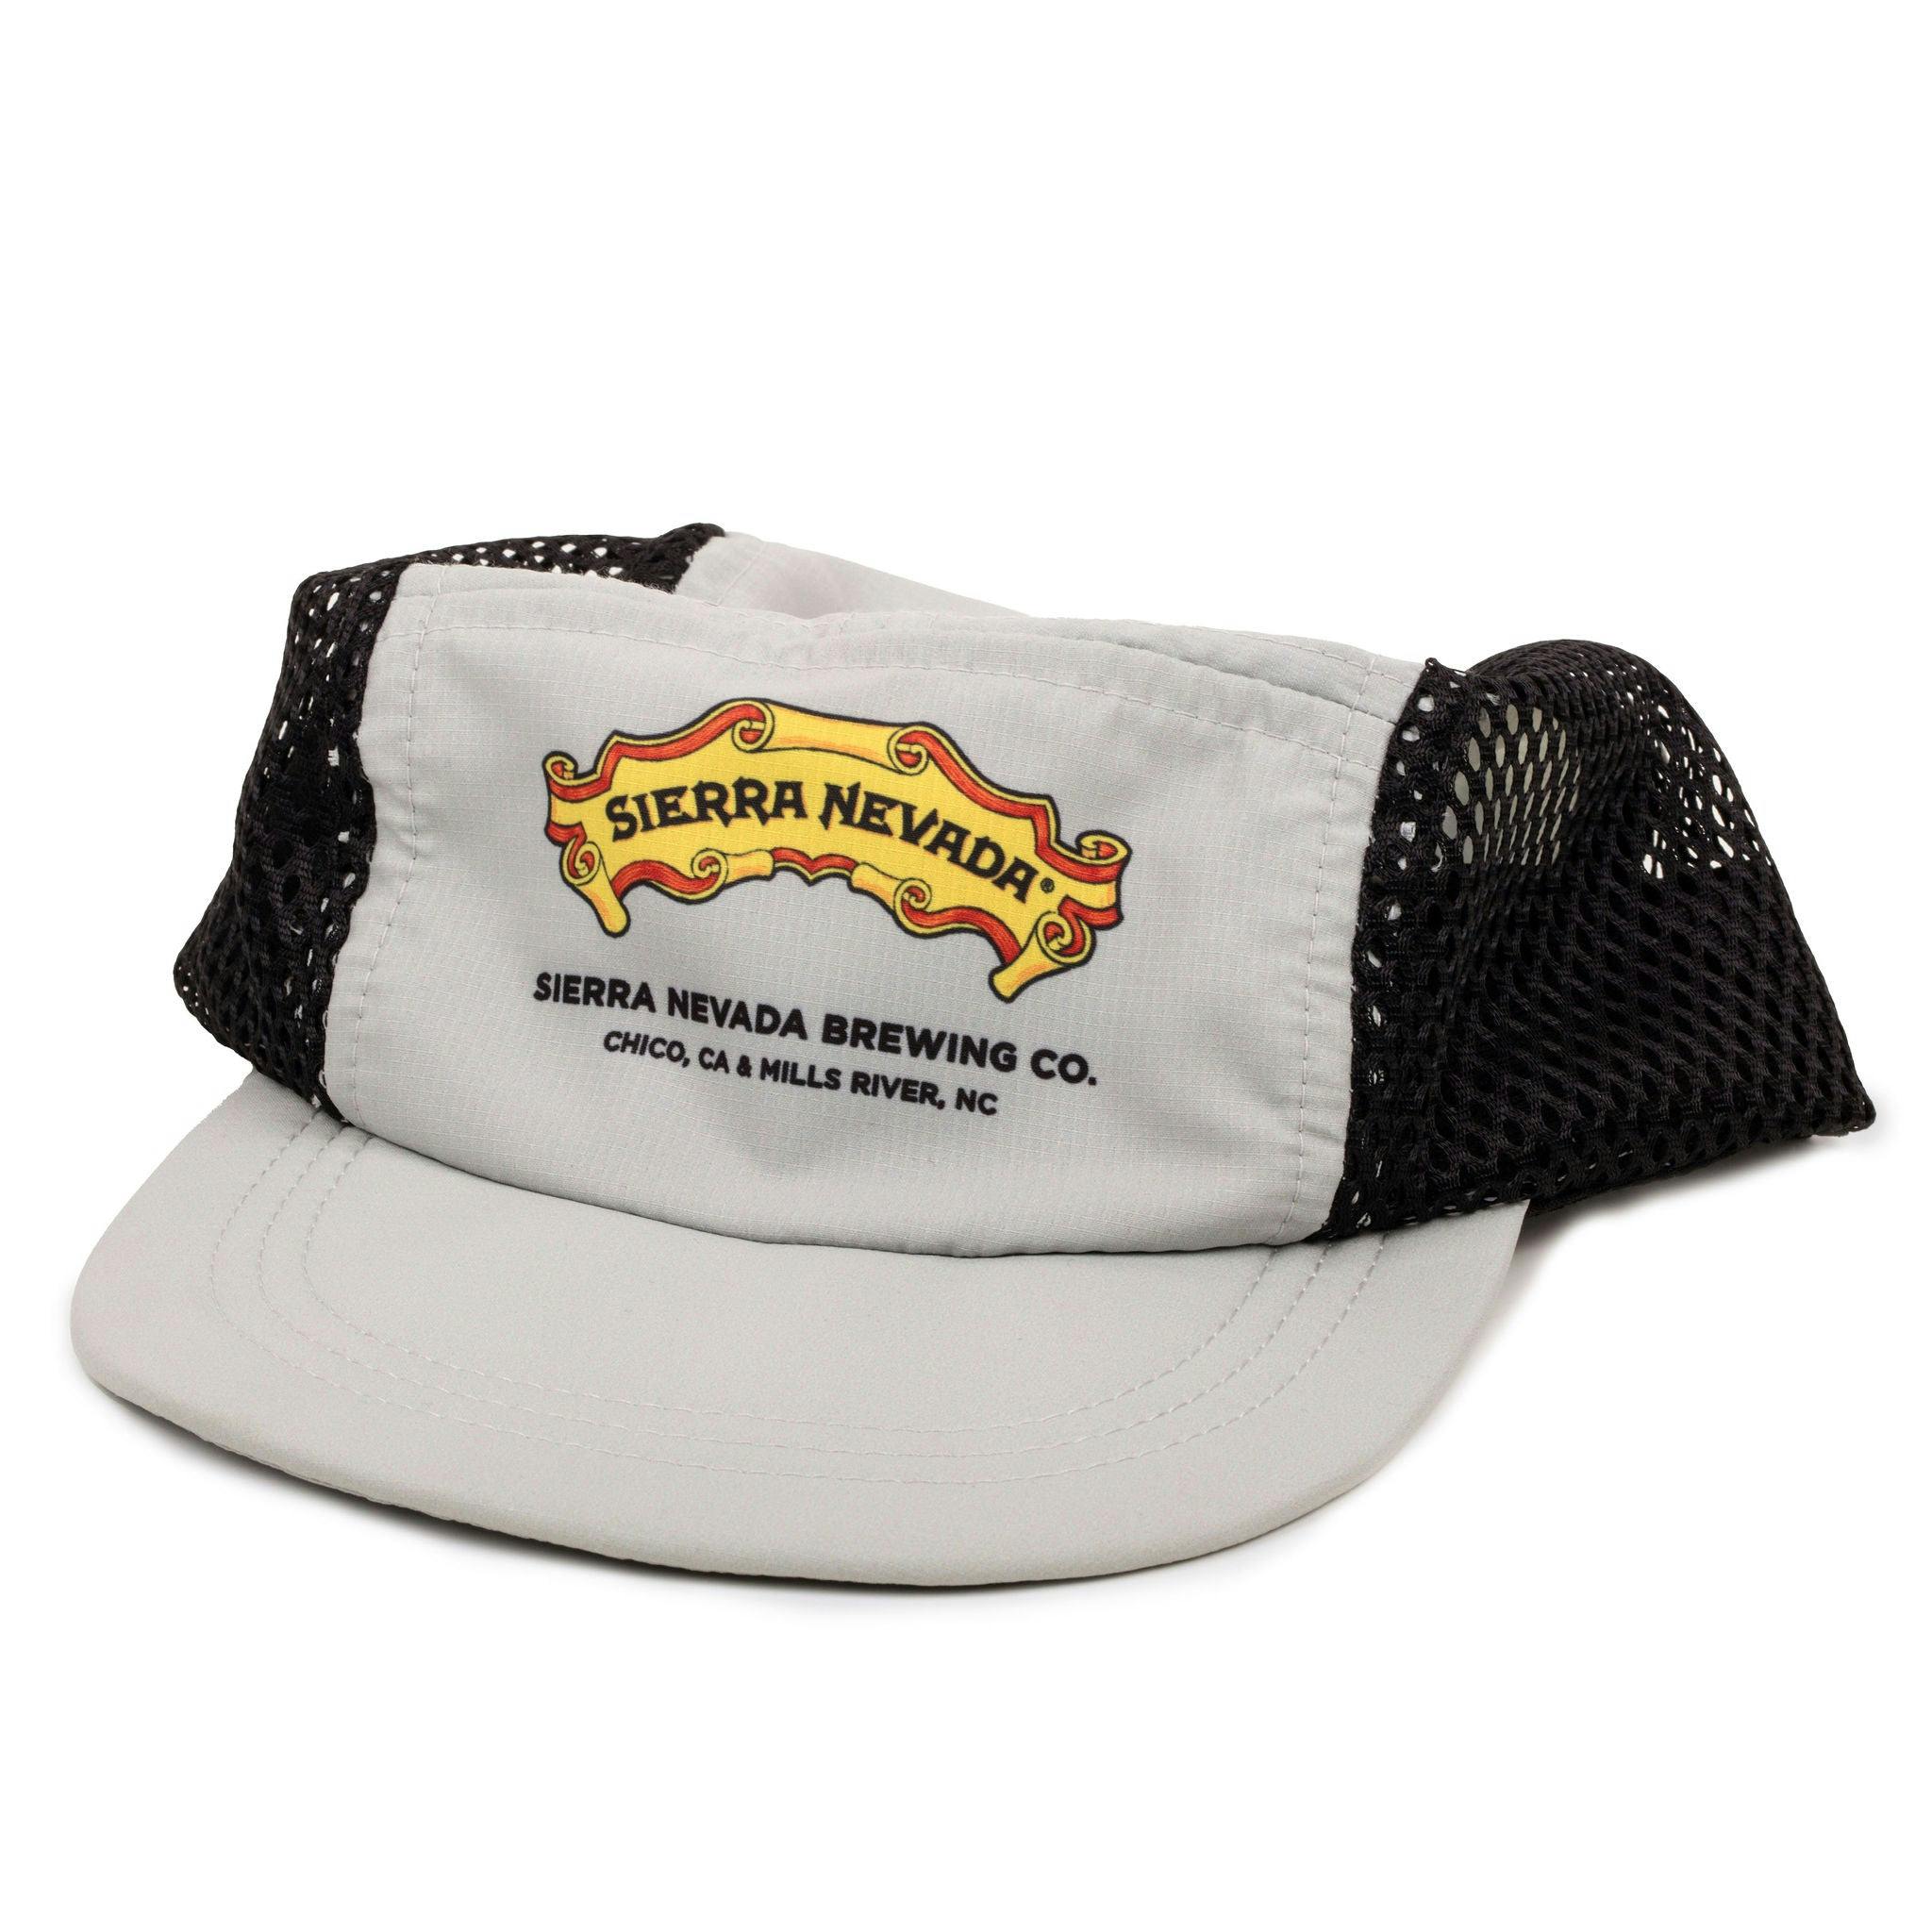 Sierra Nevada Brewing Co. Camper Hat - front view showing the packable feature of the hat and how it can be collapsed down